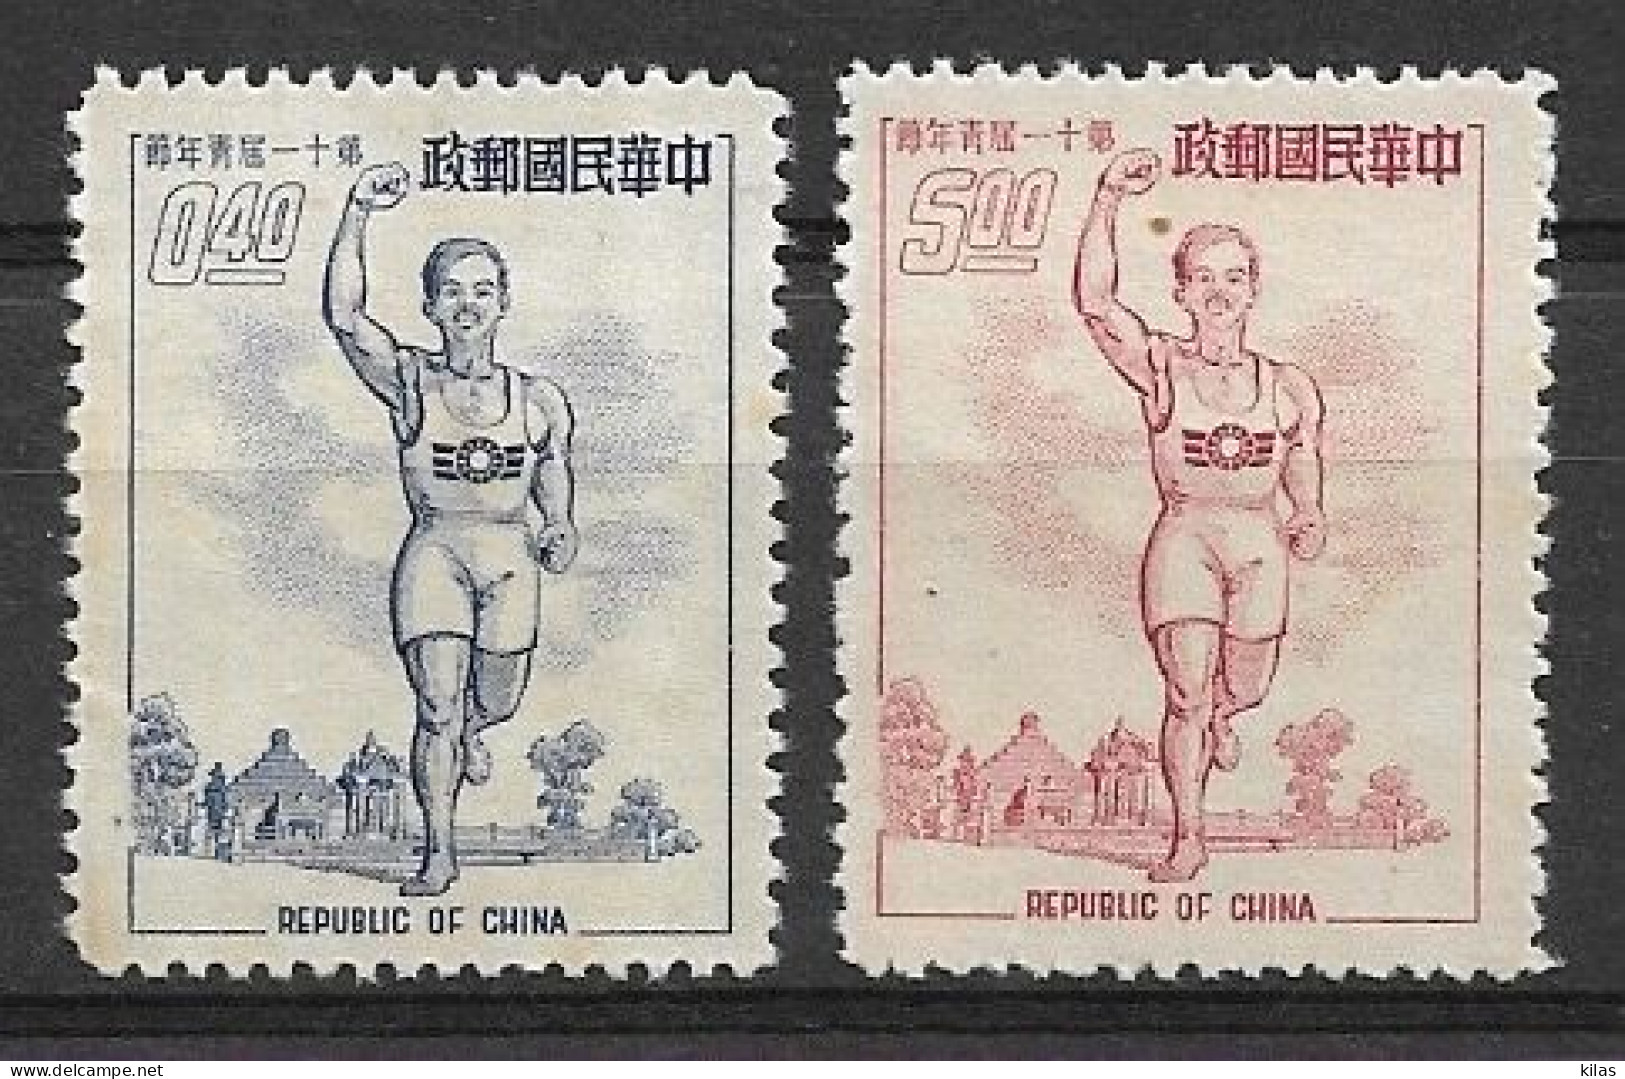 TAIWAN (FORMOSA) 1954 11TH YOUTH DAY MNH - Unused Stamps